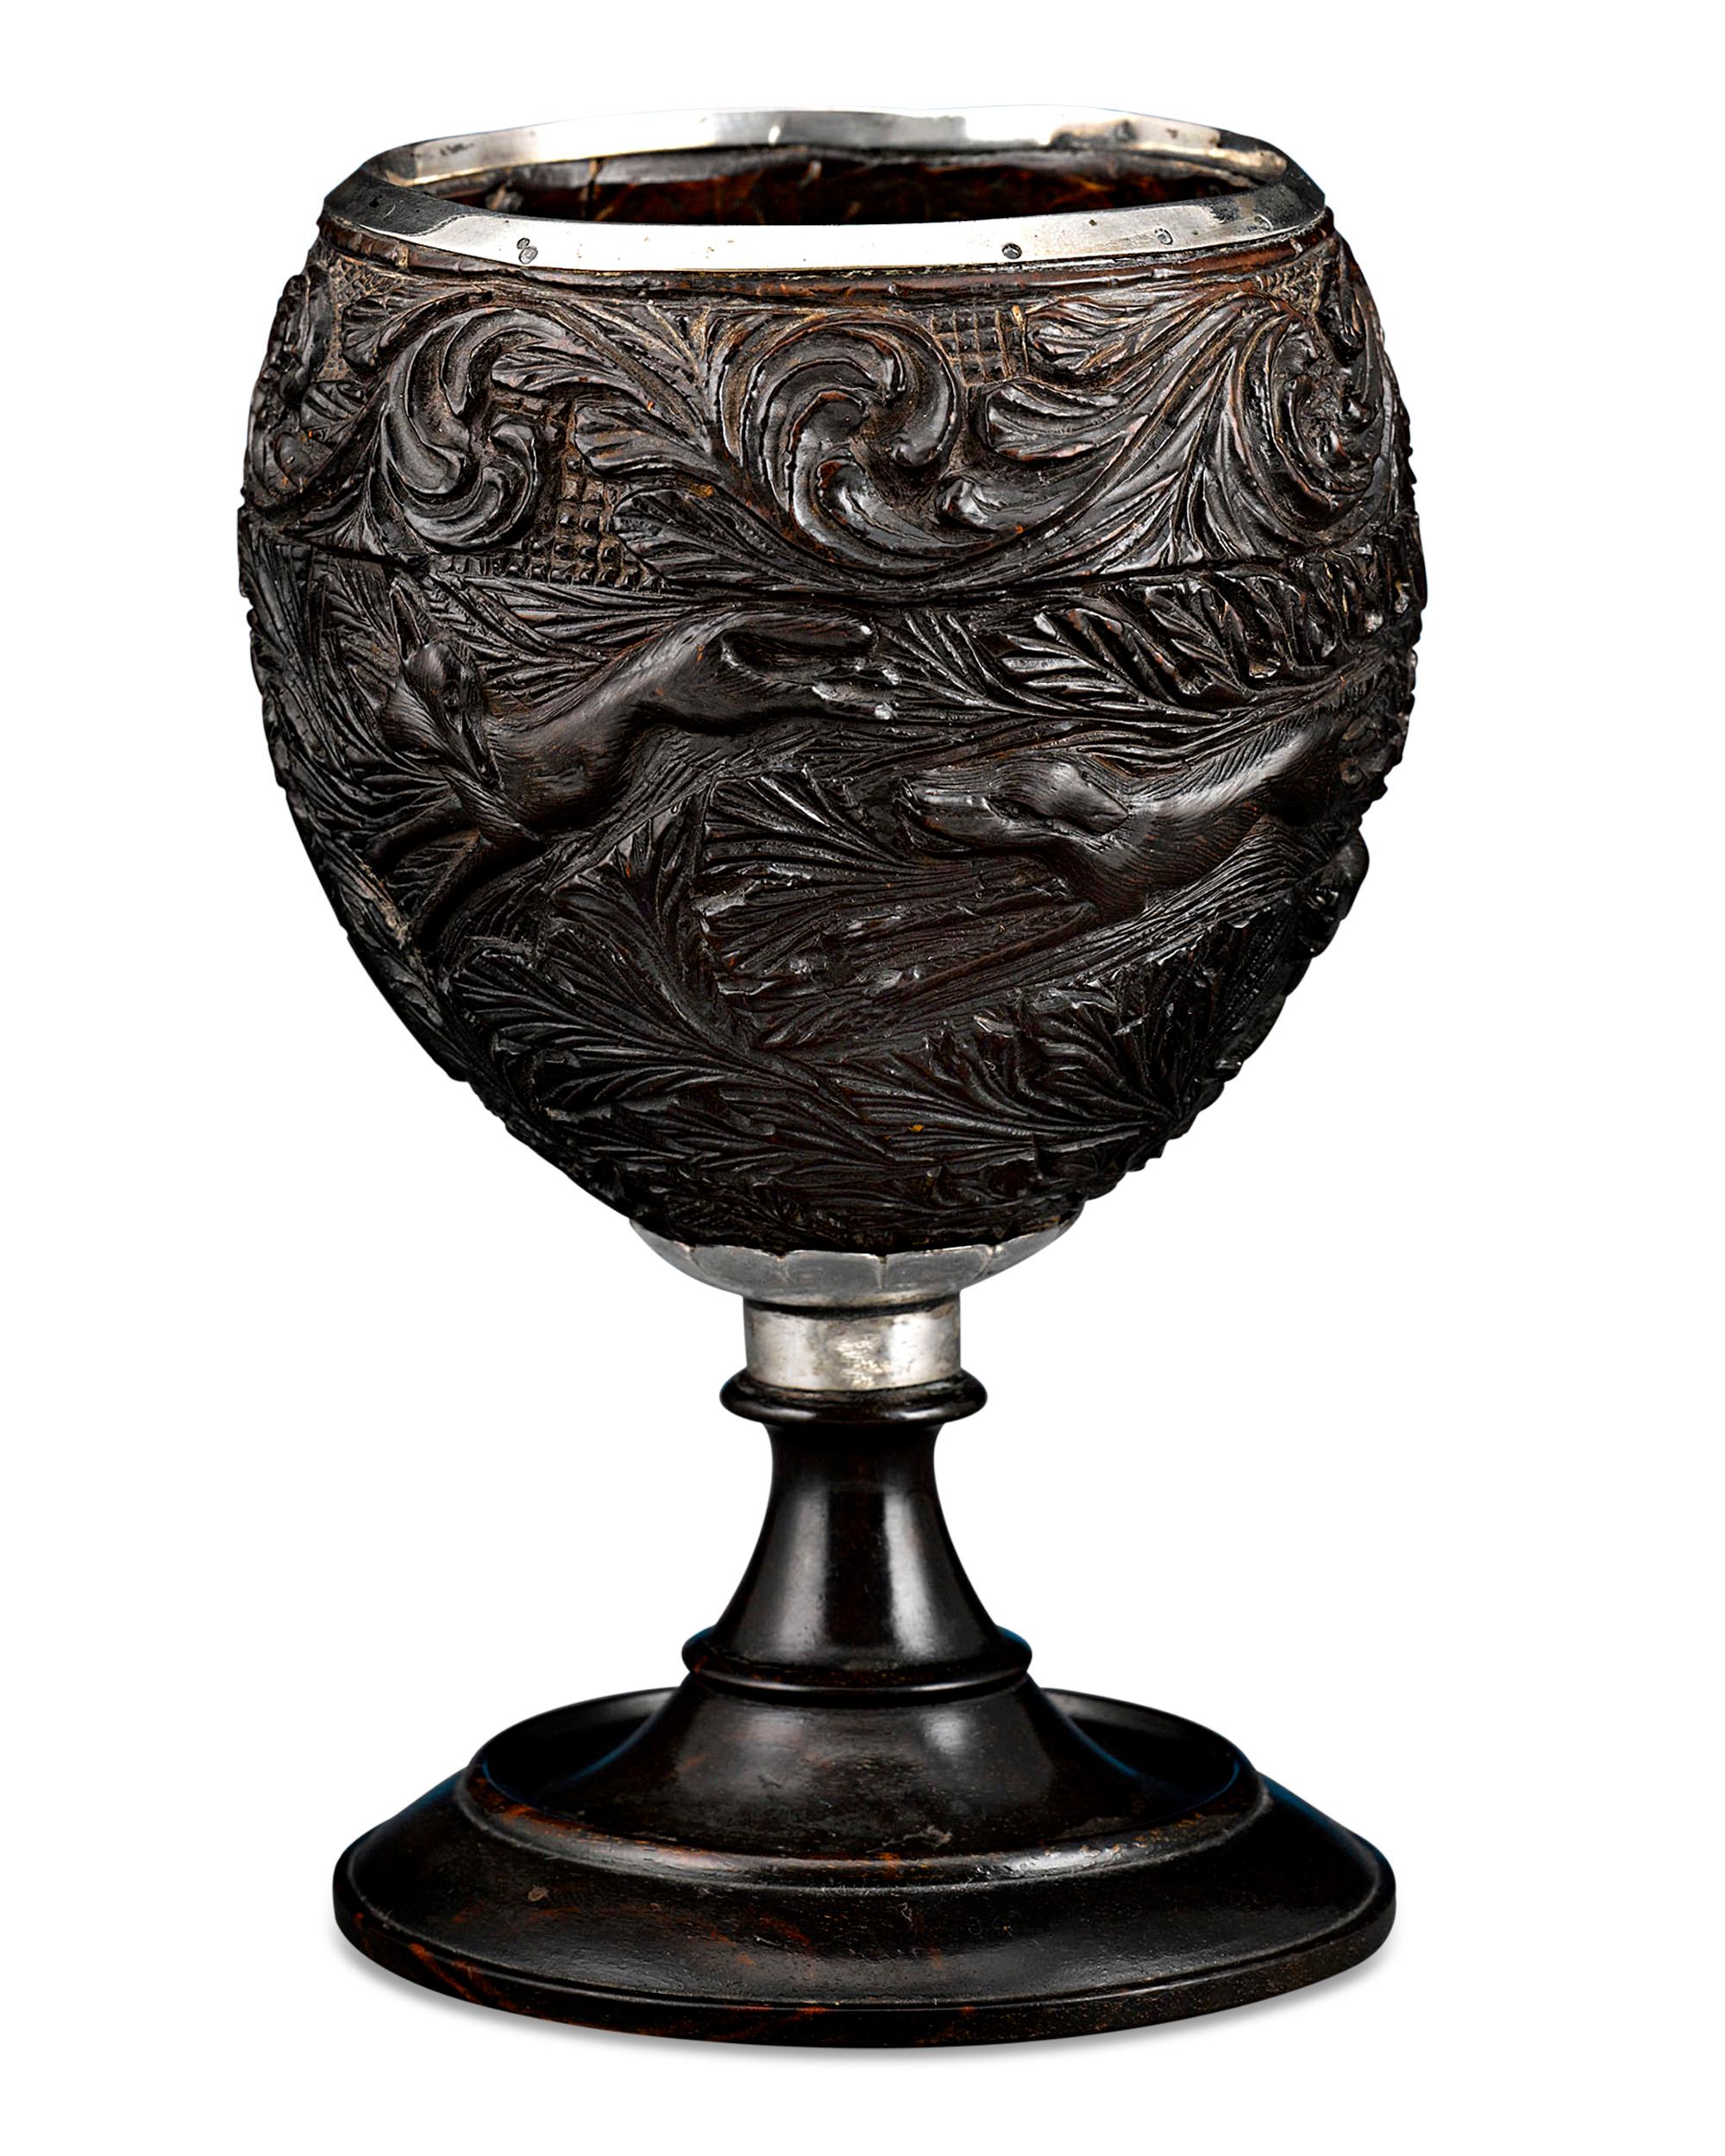 An exotic coconut fits perfectly into the ebony turned pedestal of this remarkably rare Georgian cup. Crafted during a period when coconuts were considered an extravagant novelty in England, this example bears highly detailed carvings that celebrate